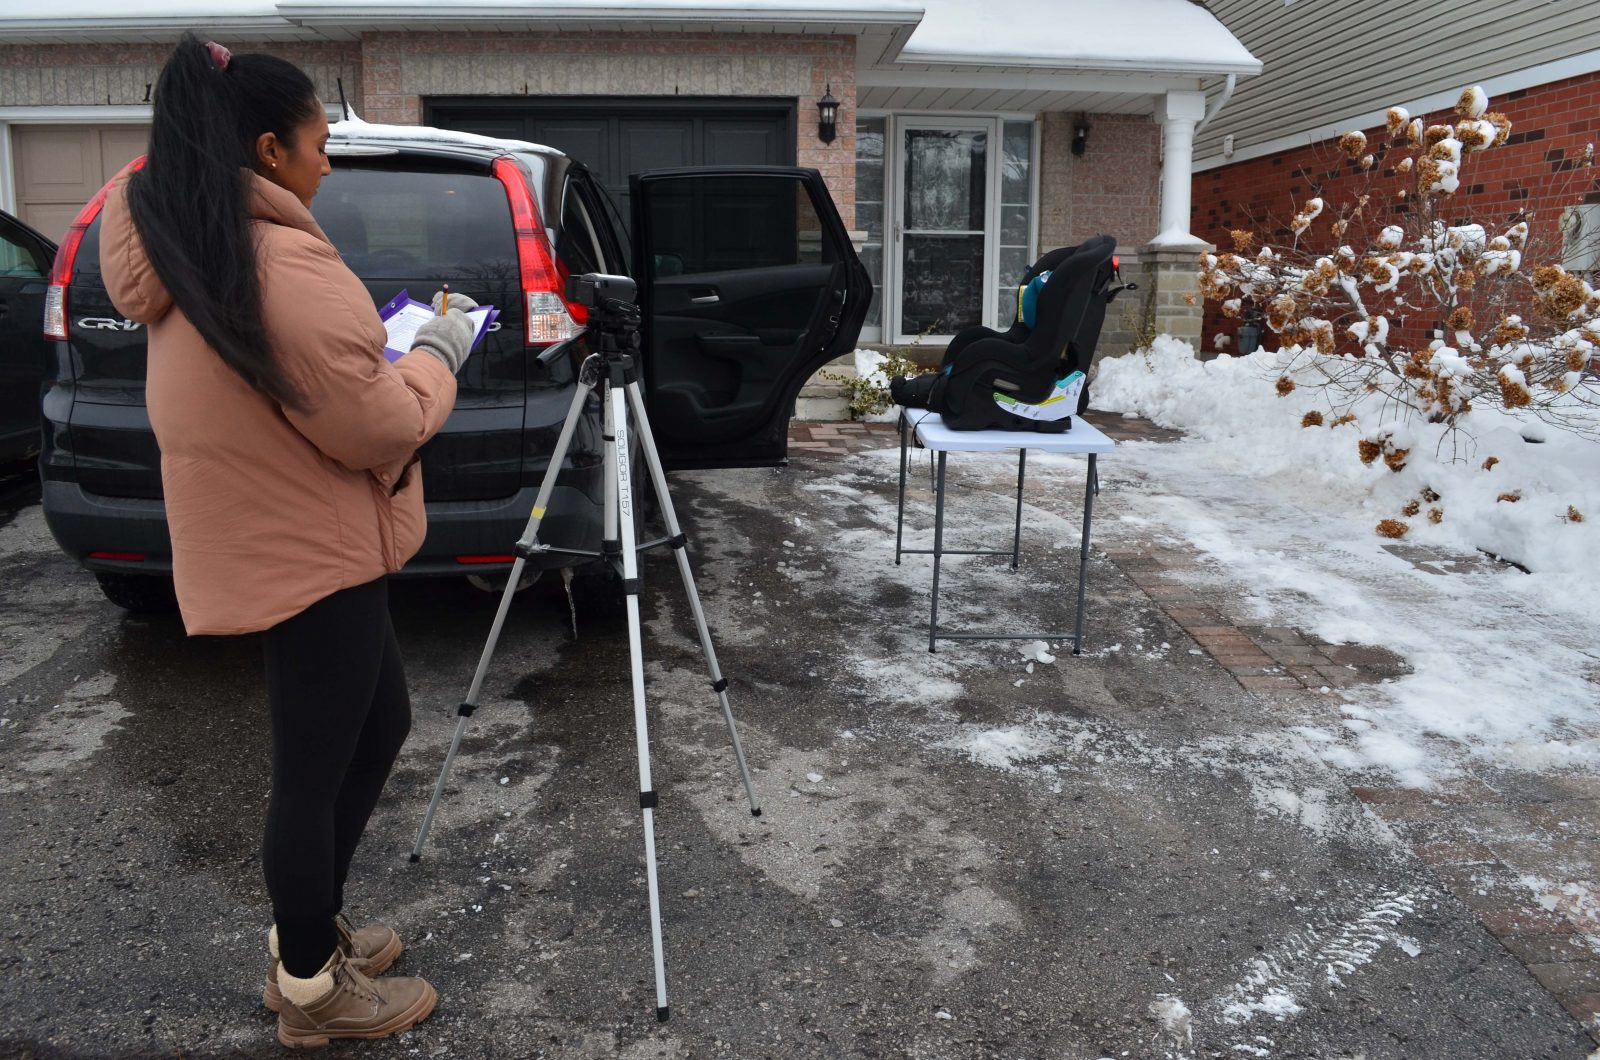 A woman stands outside with a clipboard in hand and a video camera on a tripod in front of her. She looks over towards an SUV and a table with a car seat on it.